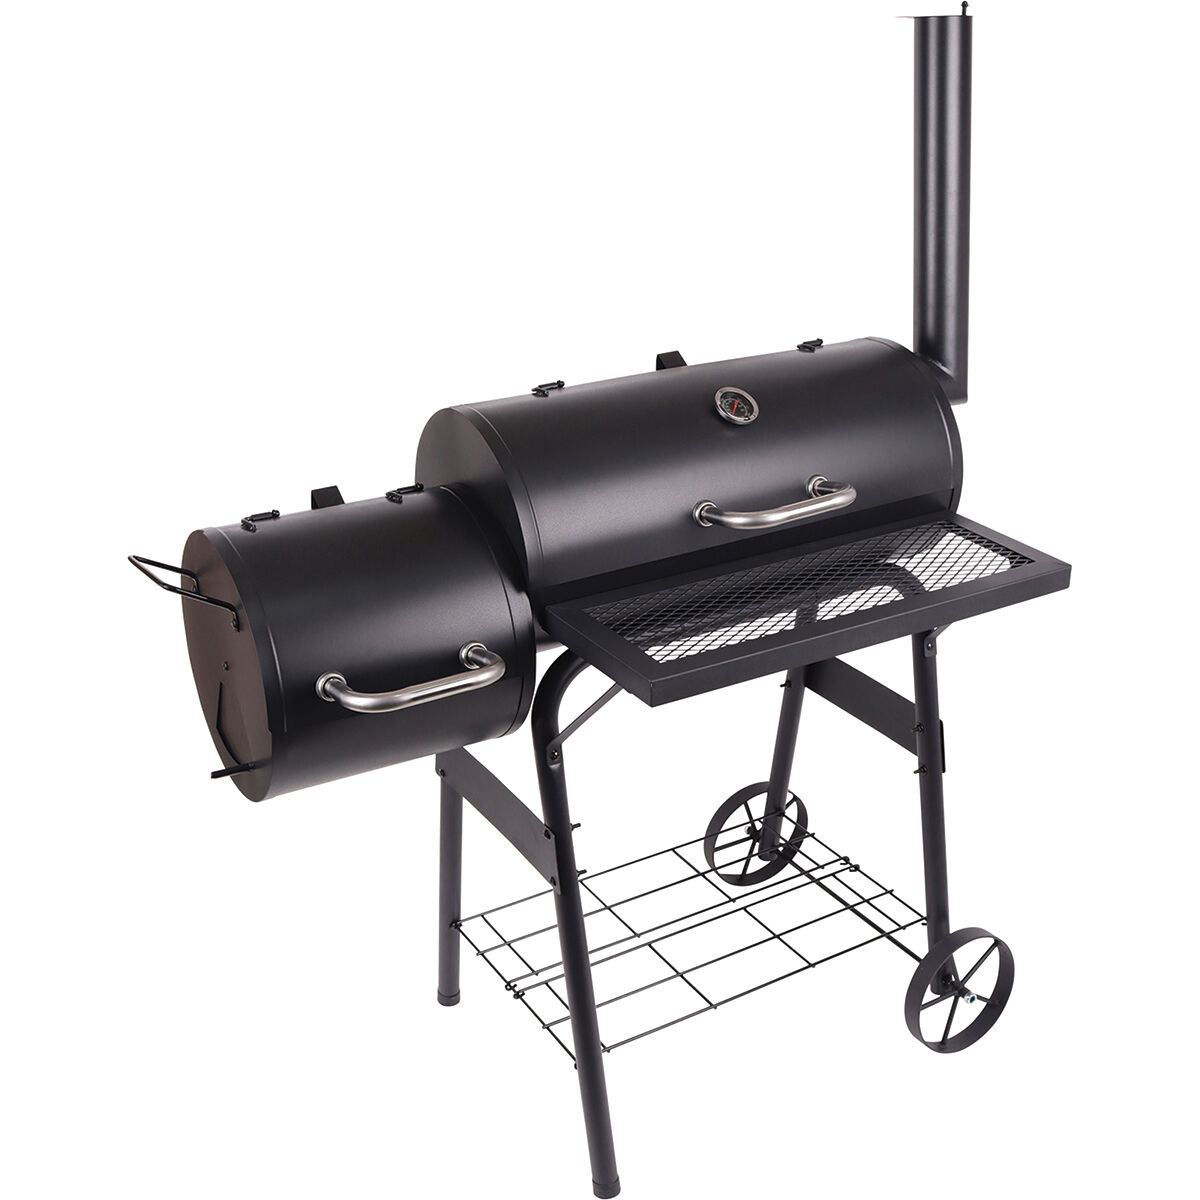 Charmate Offset Grill Smoker 